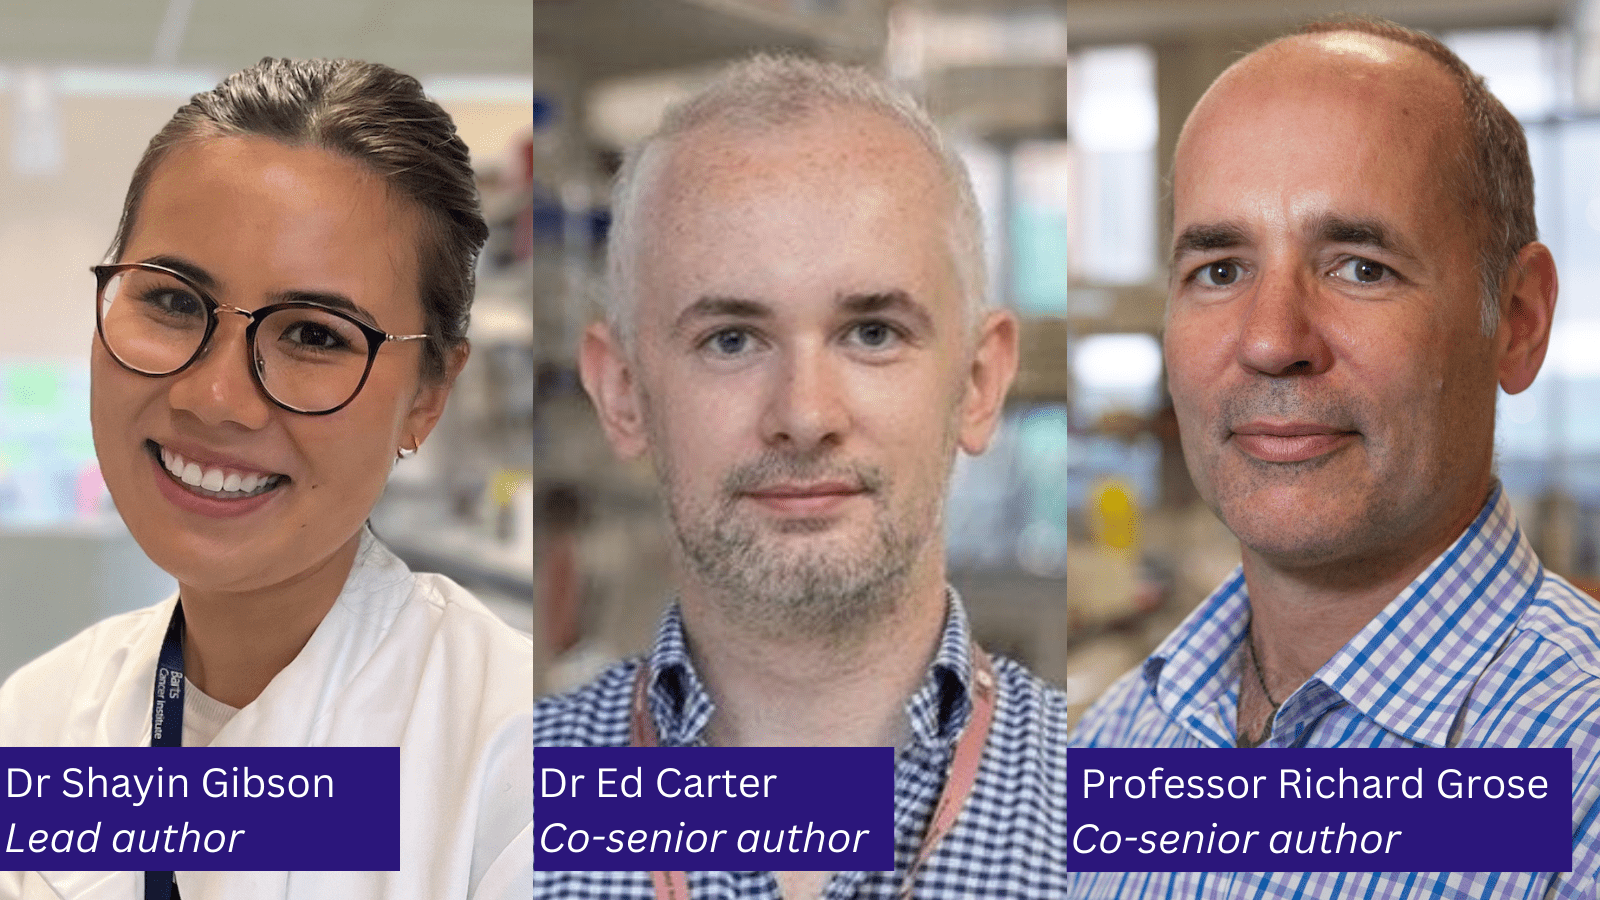 The team behind the new paper: lead author Dr Shayin Gibson, and co-senior authors Dr Ed Carter and Professor Richard Grose.